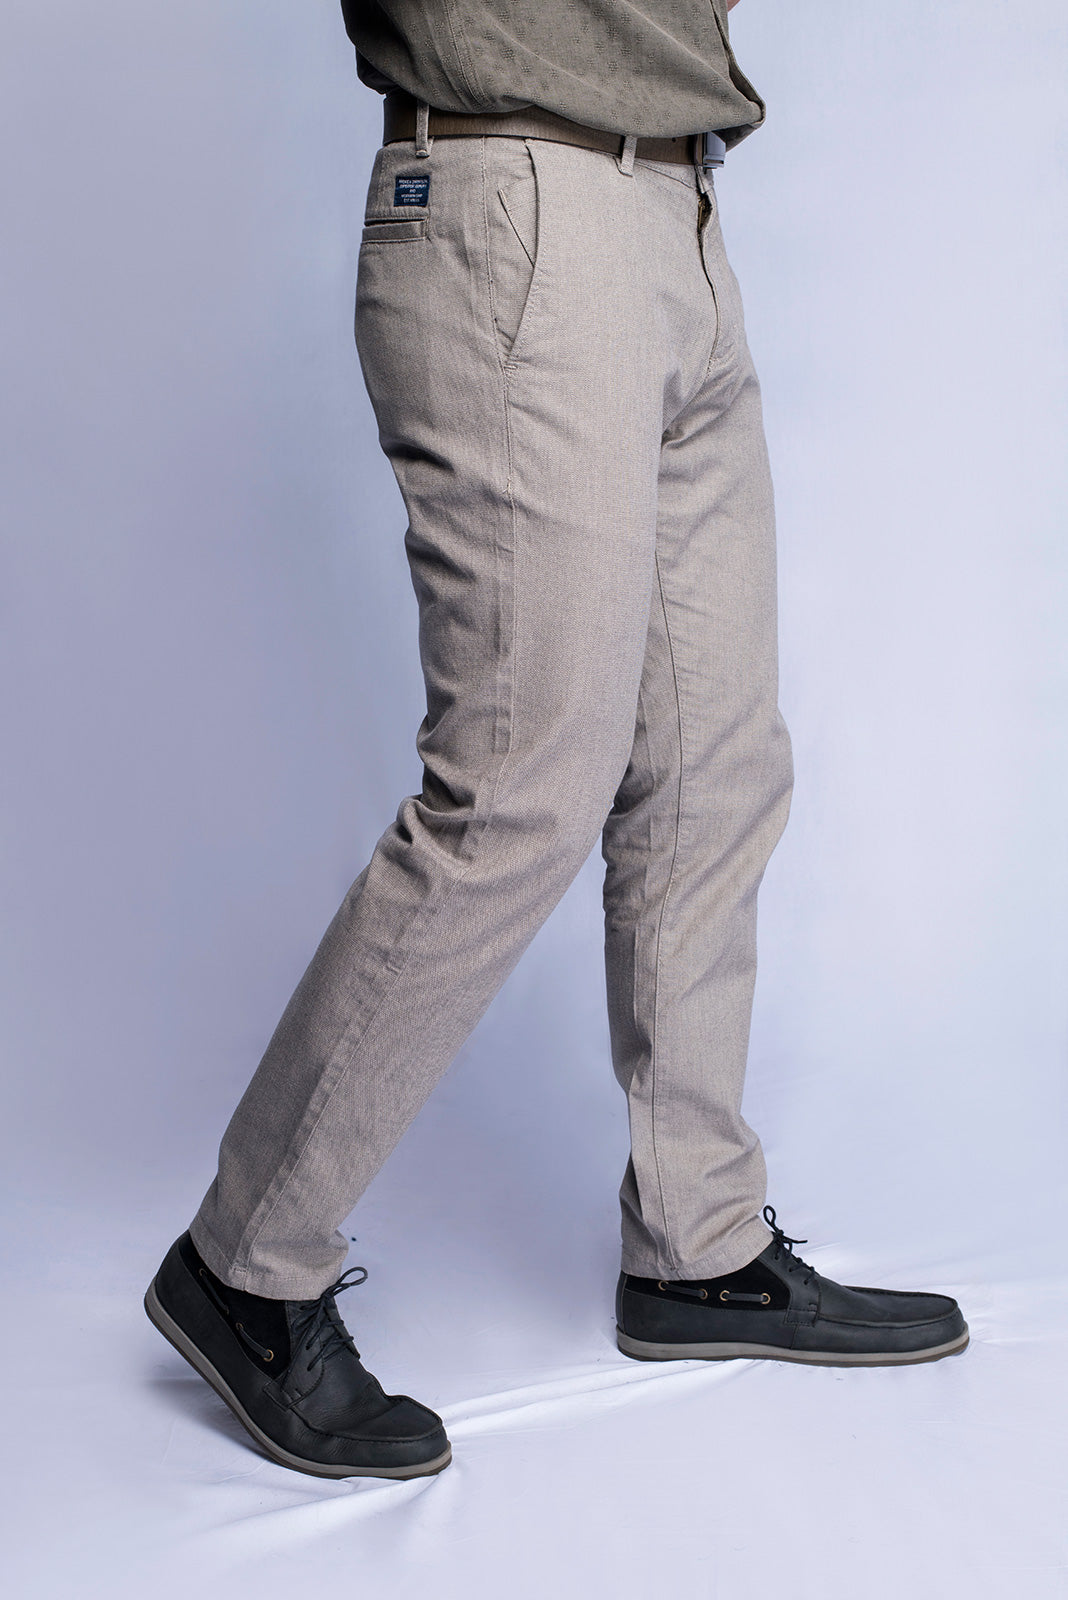 Andrew Smith Celana Panjang Chinos Slim Fit Pria A0030X05A